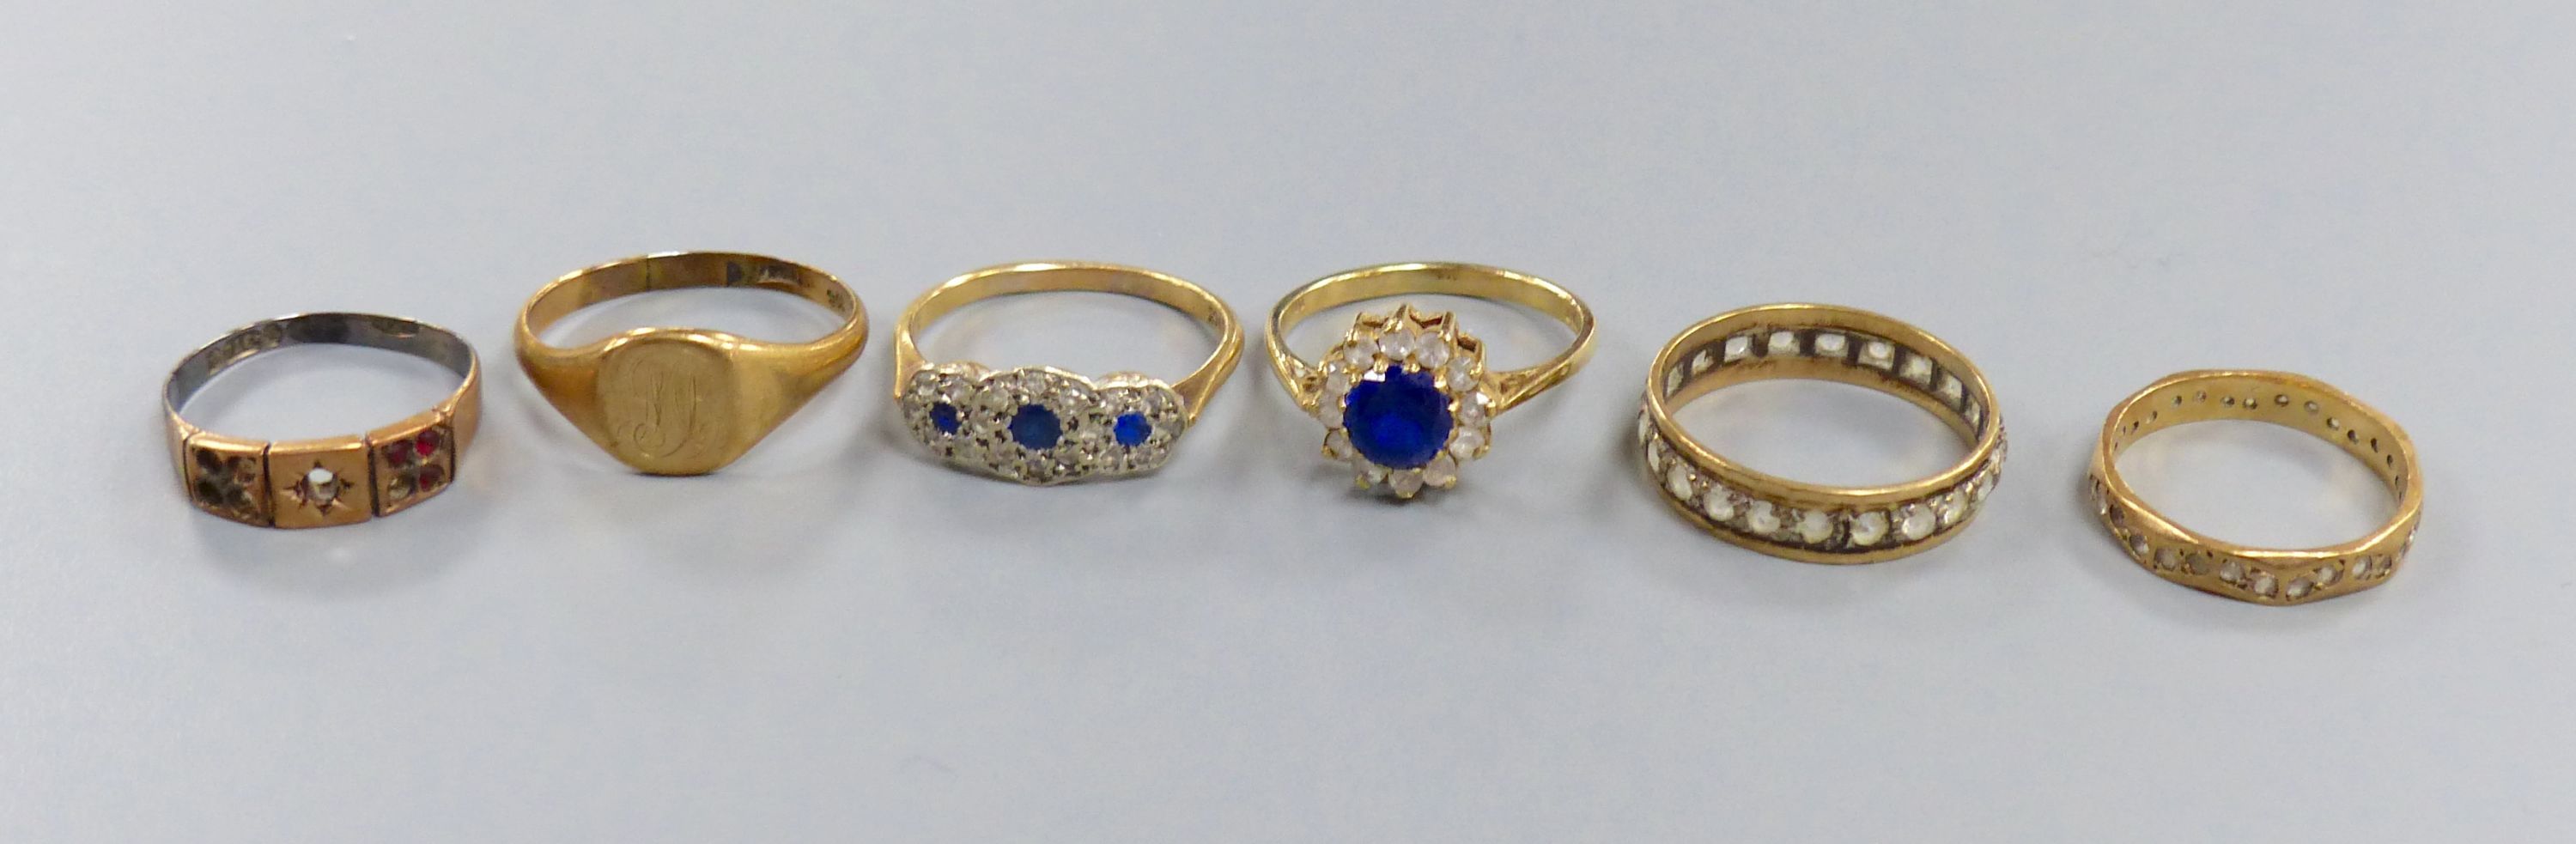 Six 9ct gold rings, variously gem or paste-set, gross 13.7 grams.